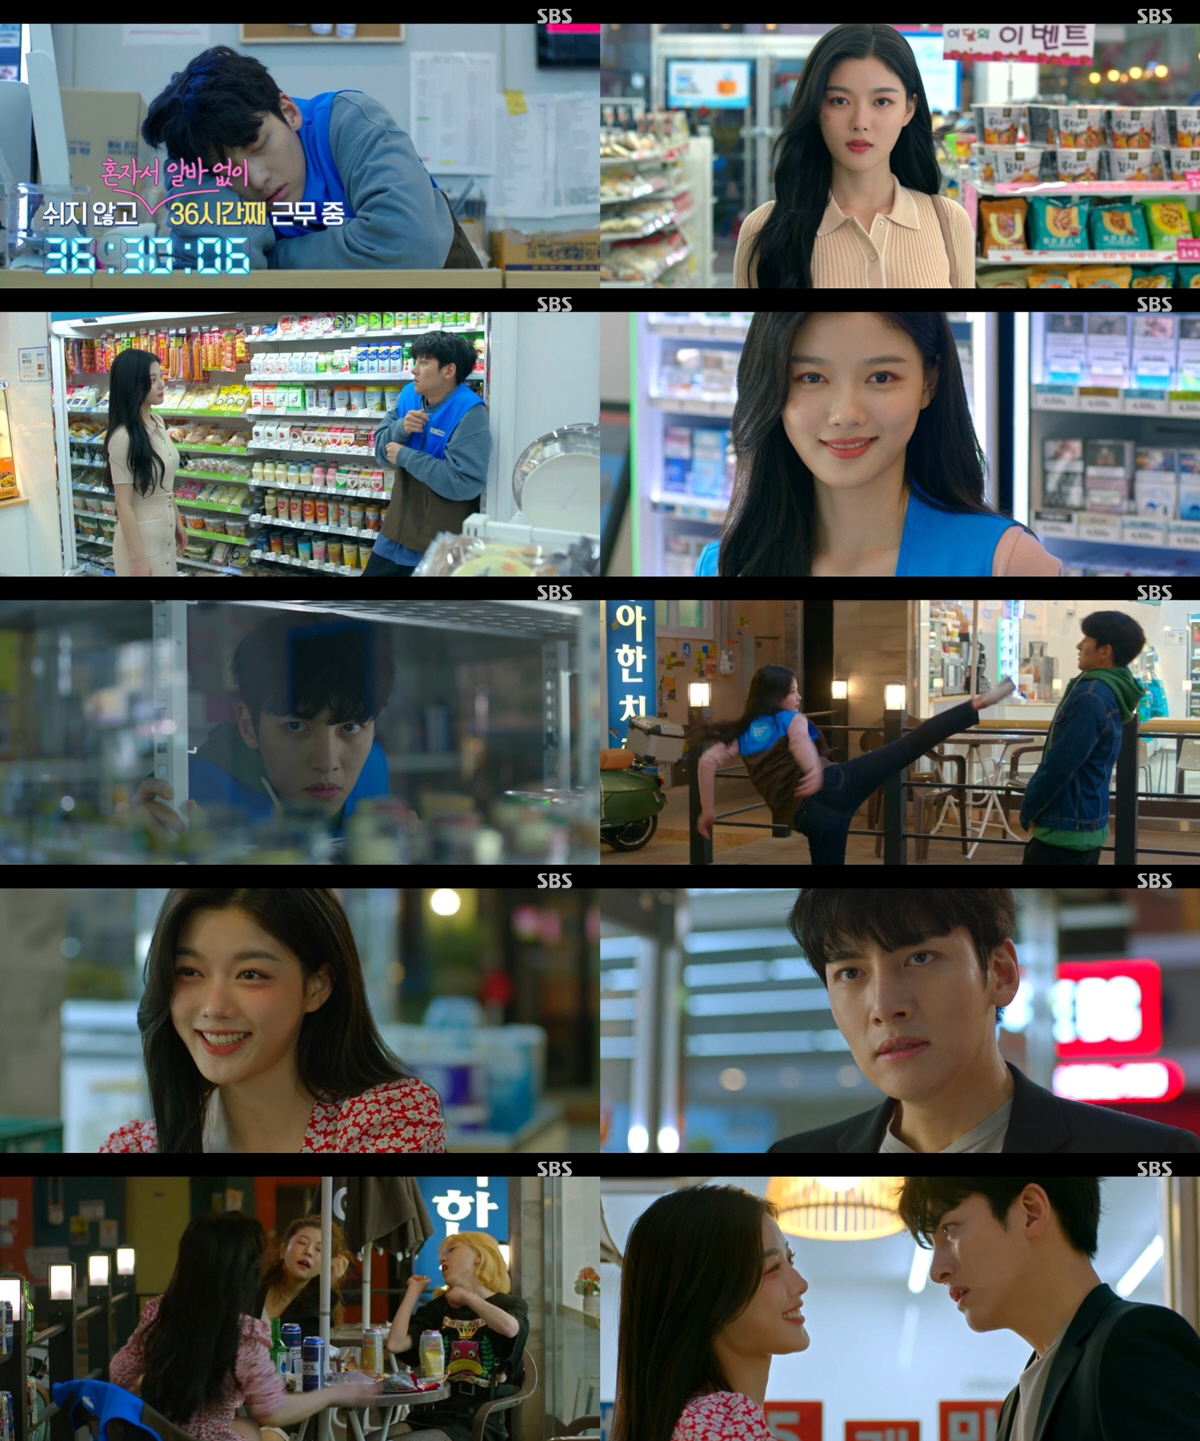 Convenience store morning star Ji Chang-wook Kim Yoo-jungs prediction Irreplaceable You Convenience store relationship has begun.SBSs Convenience Store Morning Star (playplay by Son Geun-joo/director Lee Myung-woo/Produced Taewon Entertainment), which was first broadcast on June 19, is a comic romance that takes place on a 24-hour Convenience store, with Hunnam manager Choi Dae-heon (Ji Chang-wook) and four-dimensional albasaeng Jeong Sae-byeol (Ji Chang-wook) Yoo-jung) opened the first door of Lamar Jackson by opening the beginning of the relationship.The first broadcast started with the highest audience rating of 7.3% per minute (Nilson Korea, based on the metropolitan area) and the first place in real-time search terms, capturing viewers with unique and unique characters, Hot Summer Days of Actors who delightfully portrayed them, and Chemi burst into bread.On this day, Choi Dae-heon, who reunited at the Convenience store after the first meeting that was intense three years ago, was portrayed.Choi Dae-heon, who runs a Convenience store in the neighborhood, was running a Convenience store with difficulty with his family due to poor sales.Choi Dae-heon, who was trying to save a penny, was on a 40-hour nonstop job and an Alba volunteer appeared just before he fell.Choi Dae-heon felt cheap somewhere, and remembered who the star was: a bad high school student he had met three years ago.However, during an interview with Alba, Choi Dae-heon could not bear sleepiness in the aftermath of his overnight work, and when he opened his eyes, he was working on the Convenience store on his behalf.Inevitably, Choi Dae-heon hired a star as a temporary alba, and the two peoples predictions began to live in the Irreplaceable You Convenience store.Choi Dae-heon, a manager who can not put a doubt on the star of the star, and the figure of the star-filled star who is full of the charm of catching him, explosed the charm by contrasting the drama and the pole character.Actor customizing Acting, which has brought this personality to life, is a response that made the story more anticipated.Ji Chang-wook painted Choi Dae-heon Character with pure taste Heodang Acting, and led the plays delightful atmosphere with comic Hot Summer Days, which put down the weight.Kim Yoo-jung showed spicy taste action to bad high school students who are harassing friends, and it captivated viewers by perfectly expressing the lovely charm of the star character.At the end of the broadcast, Choi Dae-heon and the ending of the premiere in front of the Convenience store of the star have amplified the curiosity for future development.Choi Dae-heon ran for a month after being informed that the star was having a night party with Friends at his Convenience store.To put a straw in my Convenience store?Choi Dae-heon, who calls for a star, and Choi Dae-heon, who smiles and smiles at him, the ending of the star, showed off the chemistry of the hall and raised expectations for the next story.The second episode of Convenience Store Morning Star, SBSs Golden Jackson, which captivated viewers with its charming character from the first episode, will be broadcast today (20th) at 10 p.m.